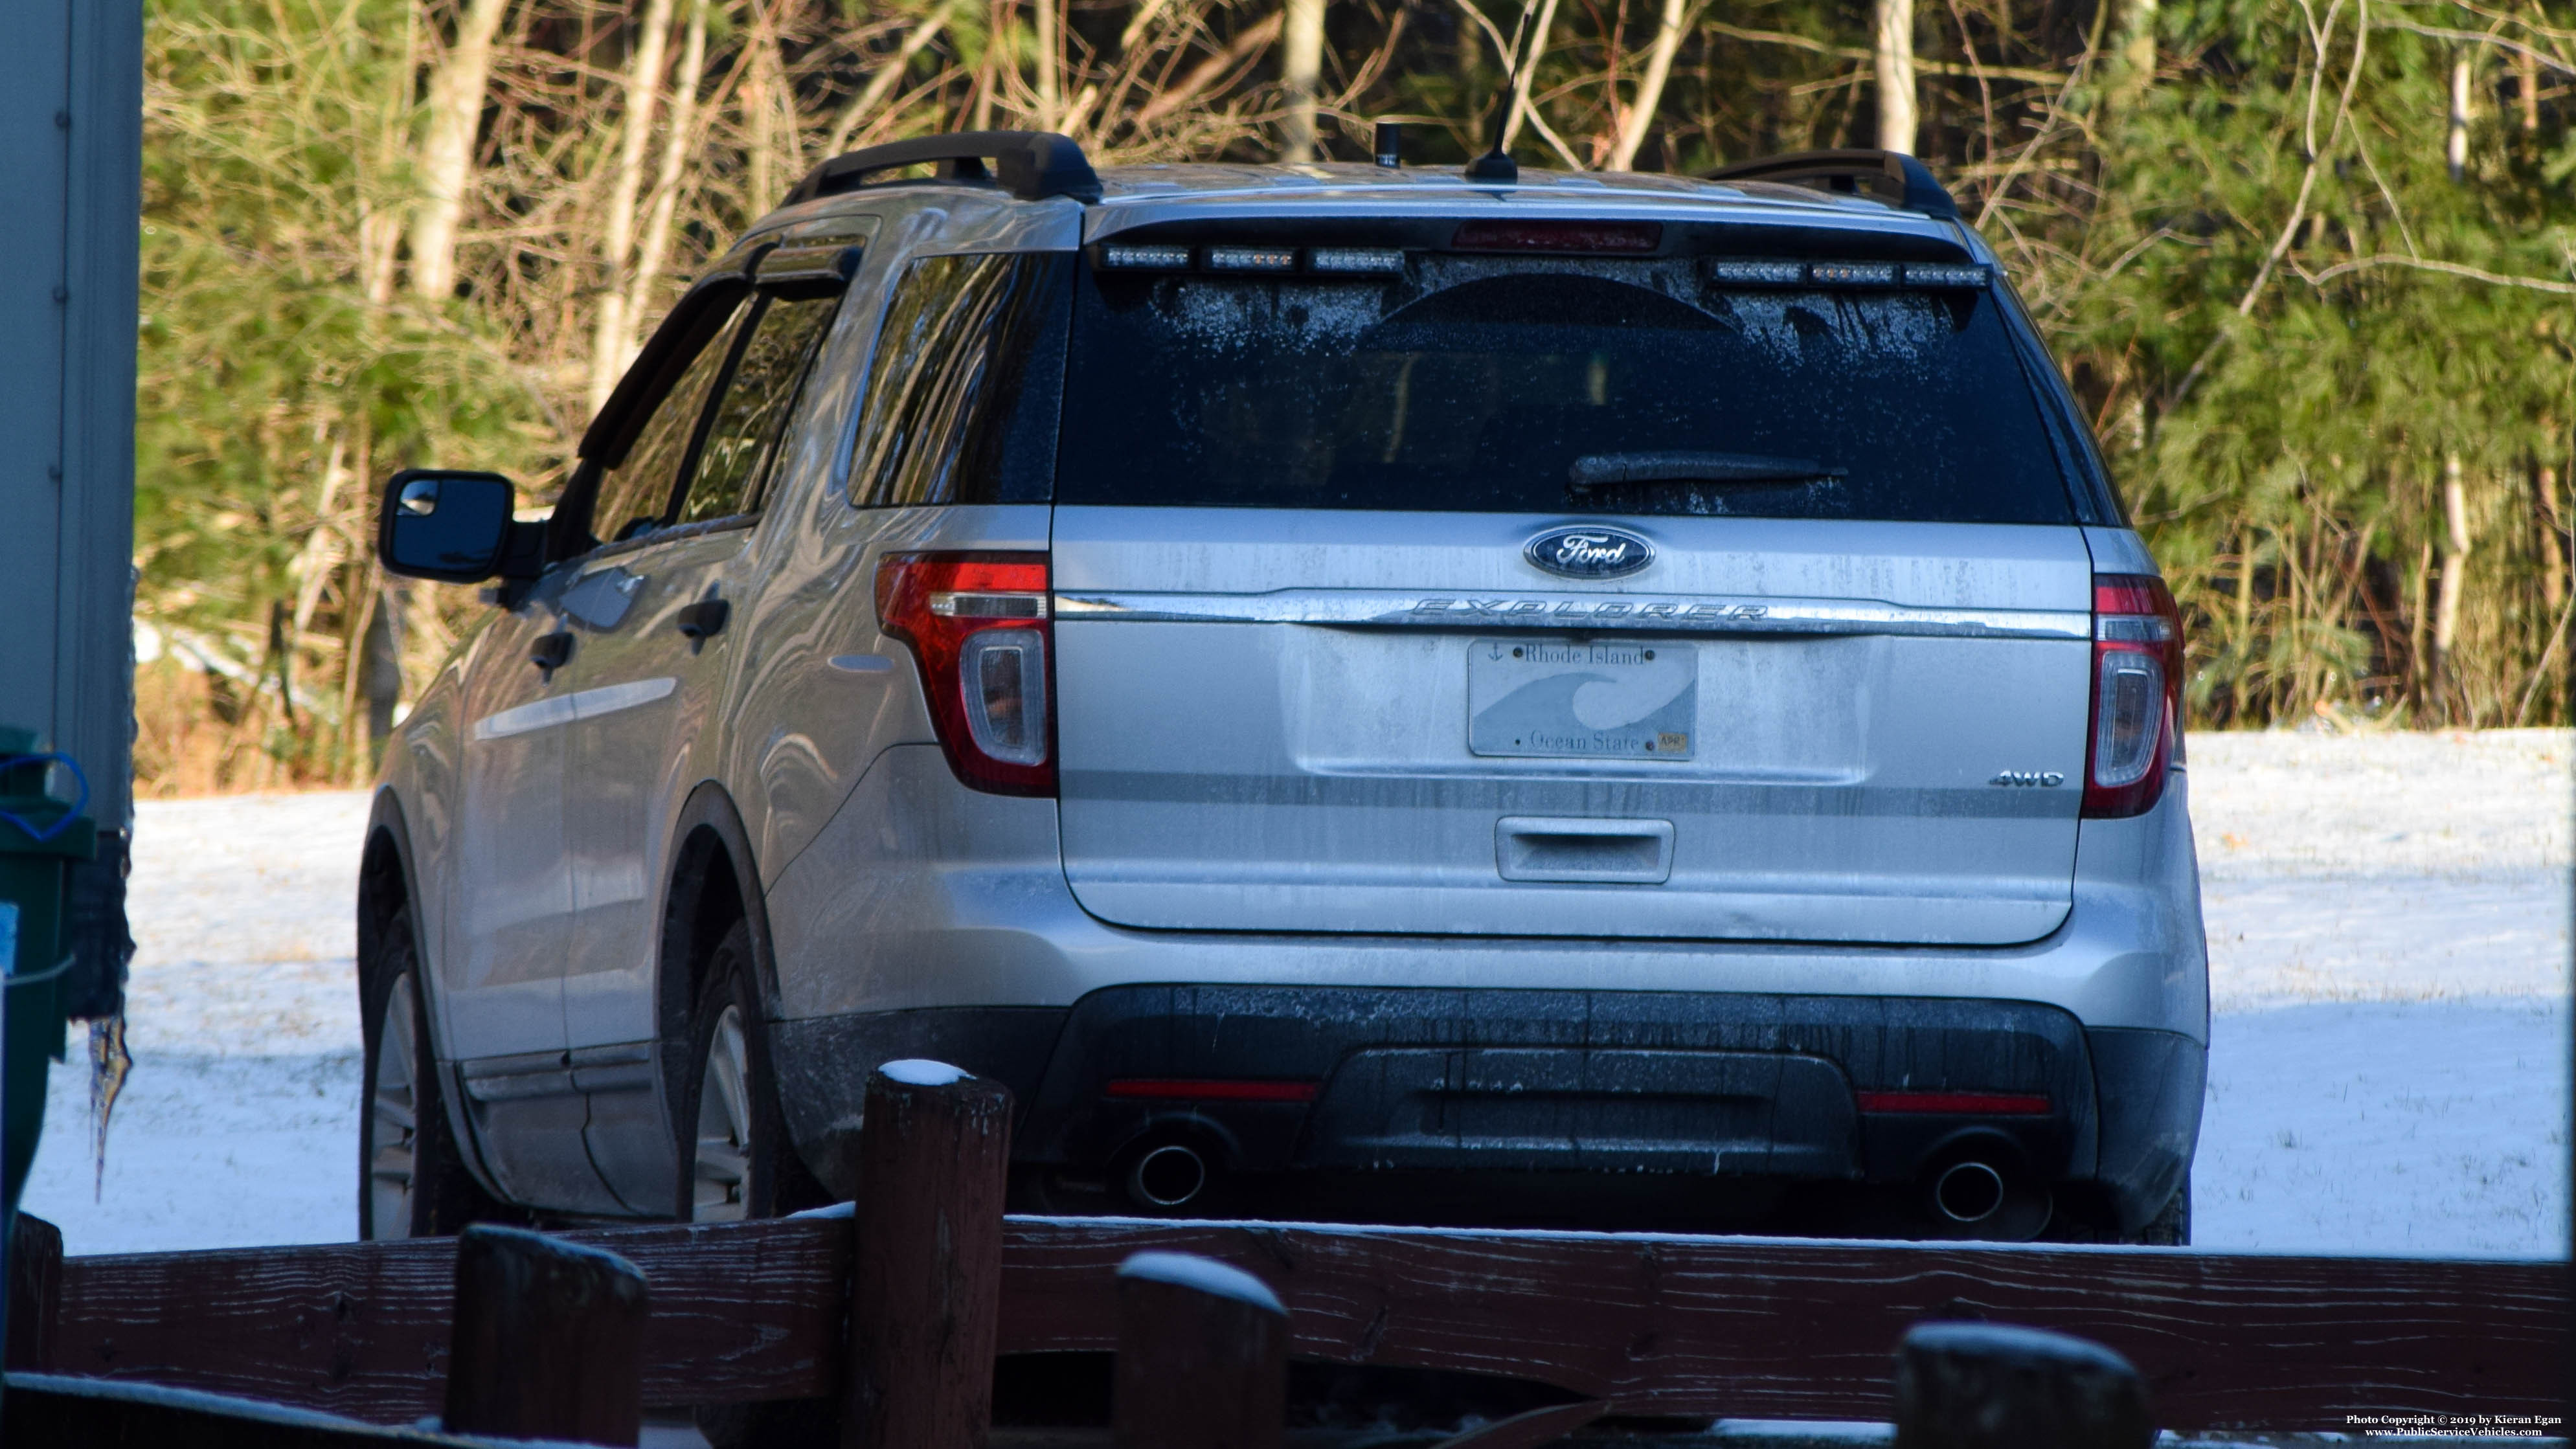 A photo  of Scituate Police
            Unmarked Unit, a 2011-2015 Ford Explorer             taken by Kieran Egan